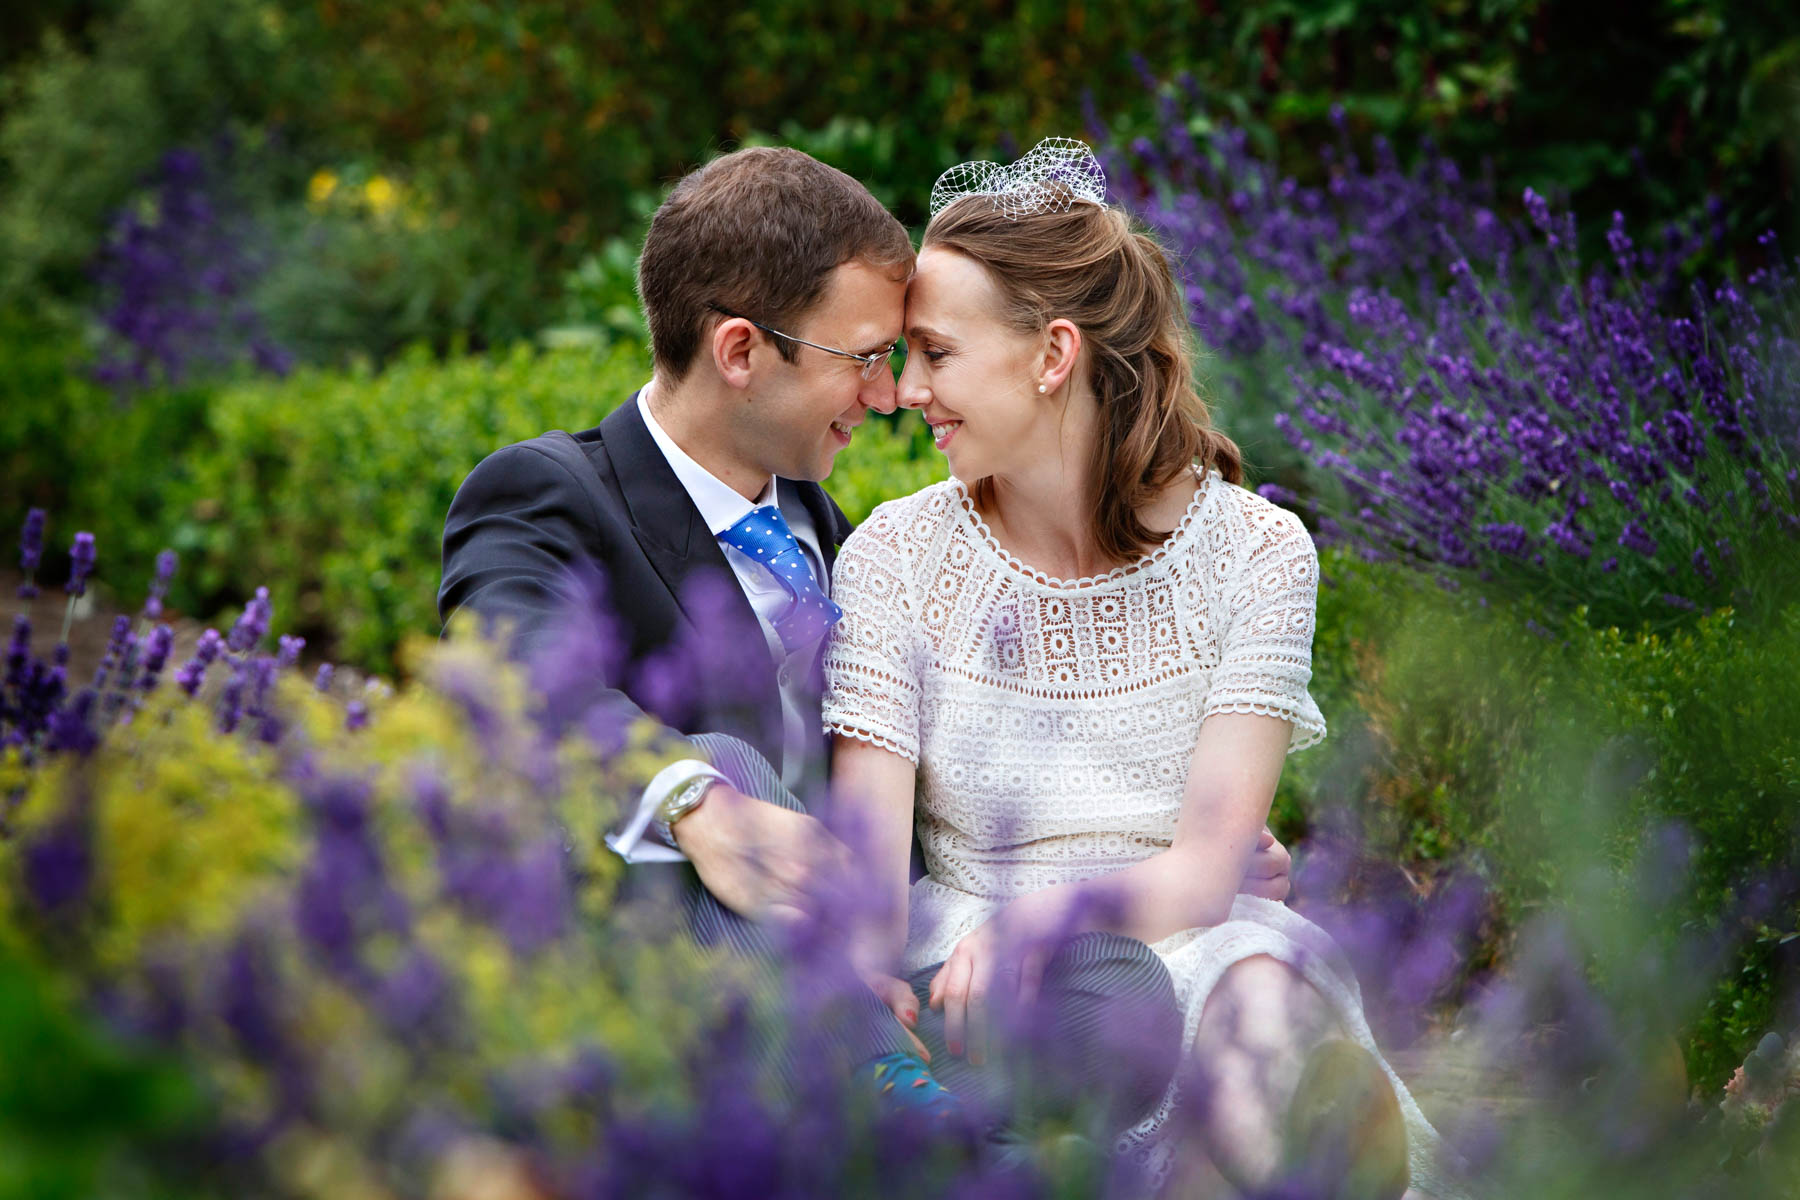 A pair of newlyweds sit in the gardens of Morden Park House, amongst lots of beautiful flowering lavender. They are sharing an intimate moment, with their foreheads resting against each other.